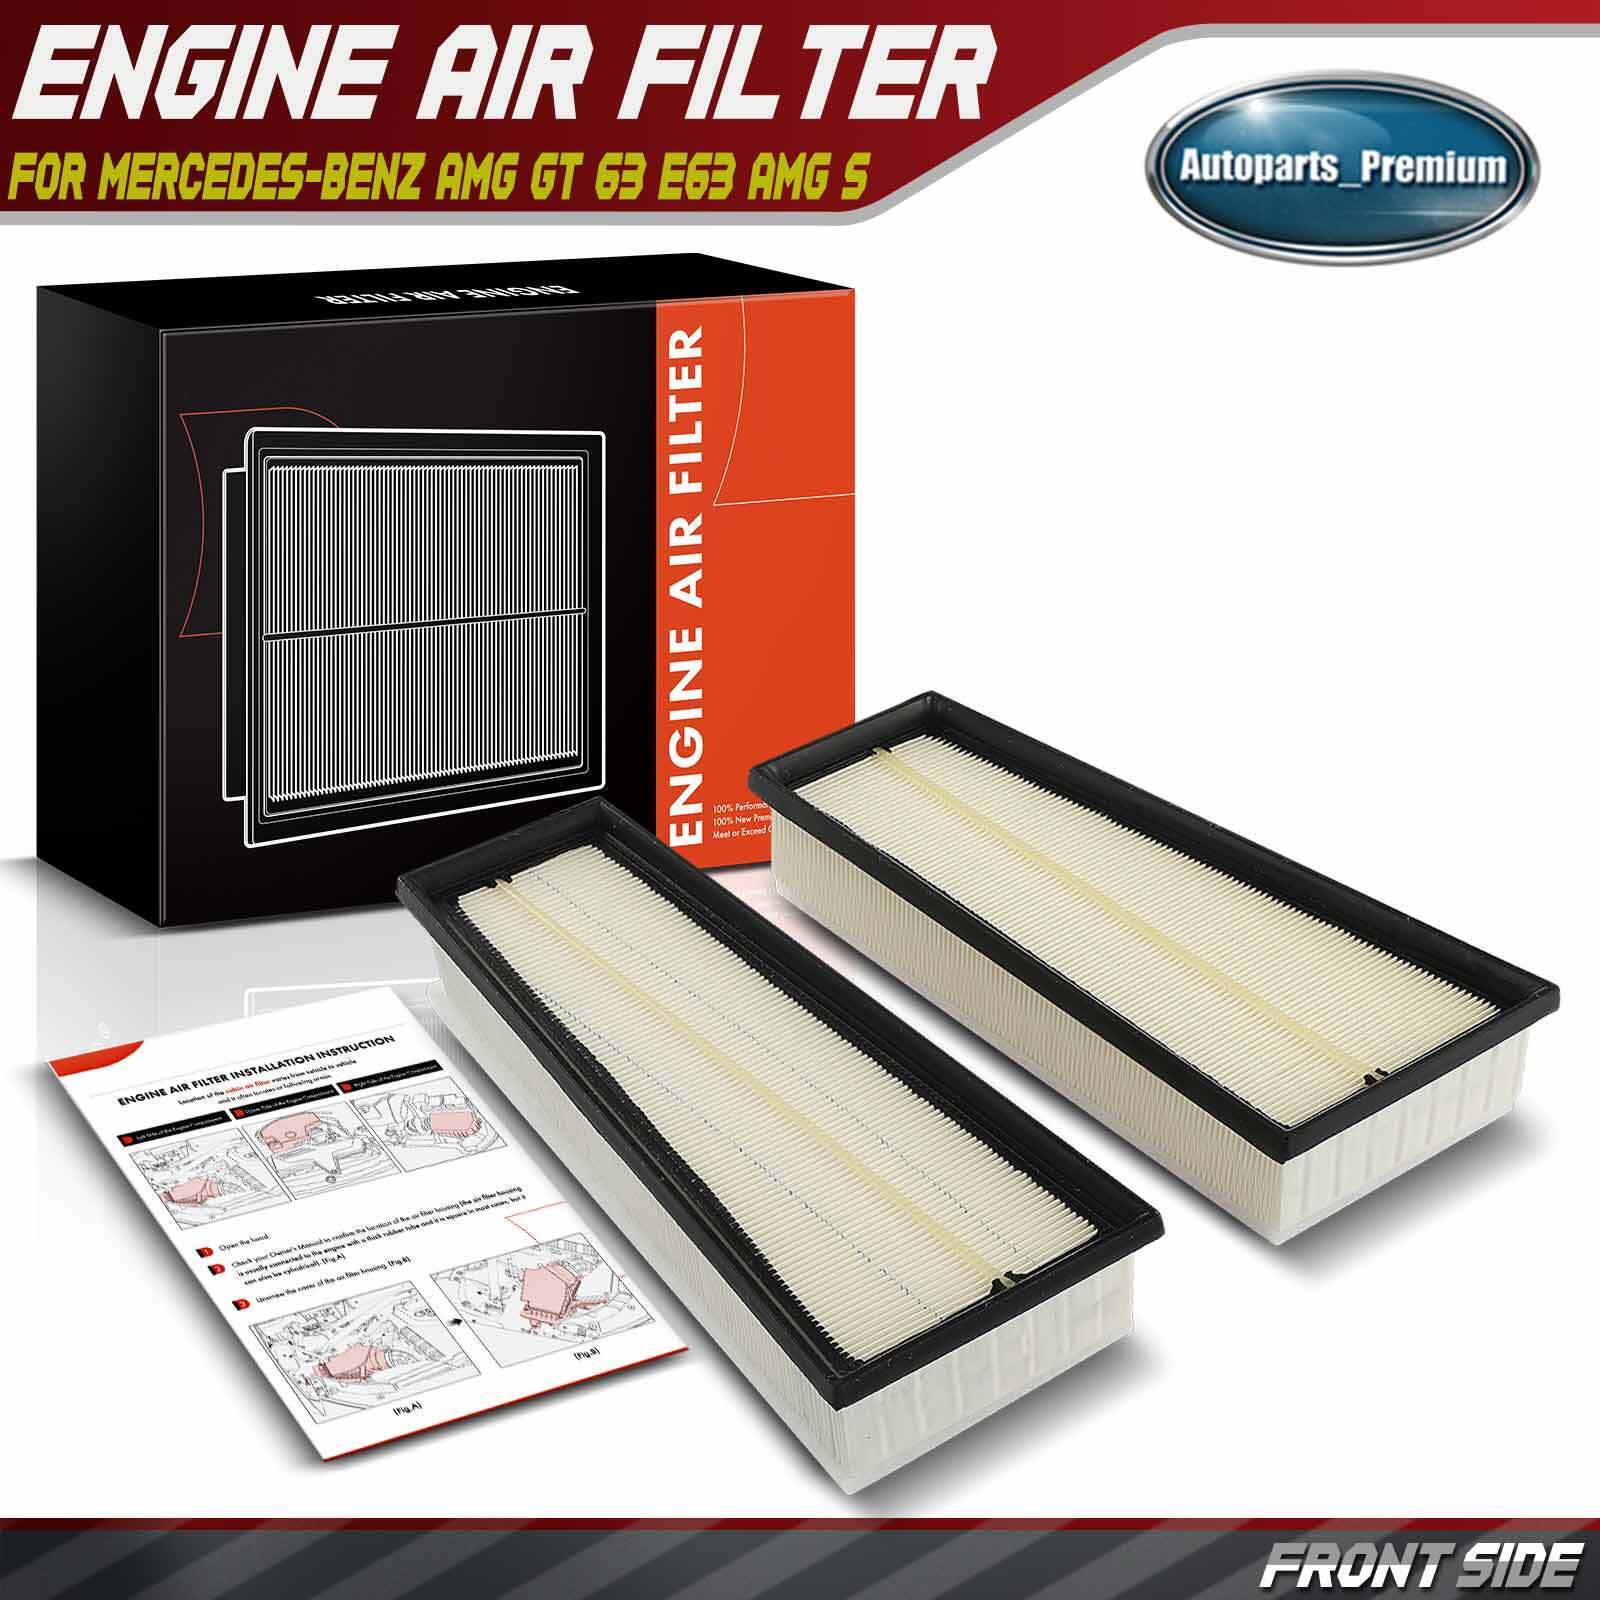 2x New Engine Air Filter for Mercedes-Benz AMG GT 63 E63 AMG S Maybach GLS600